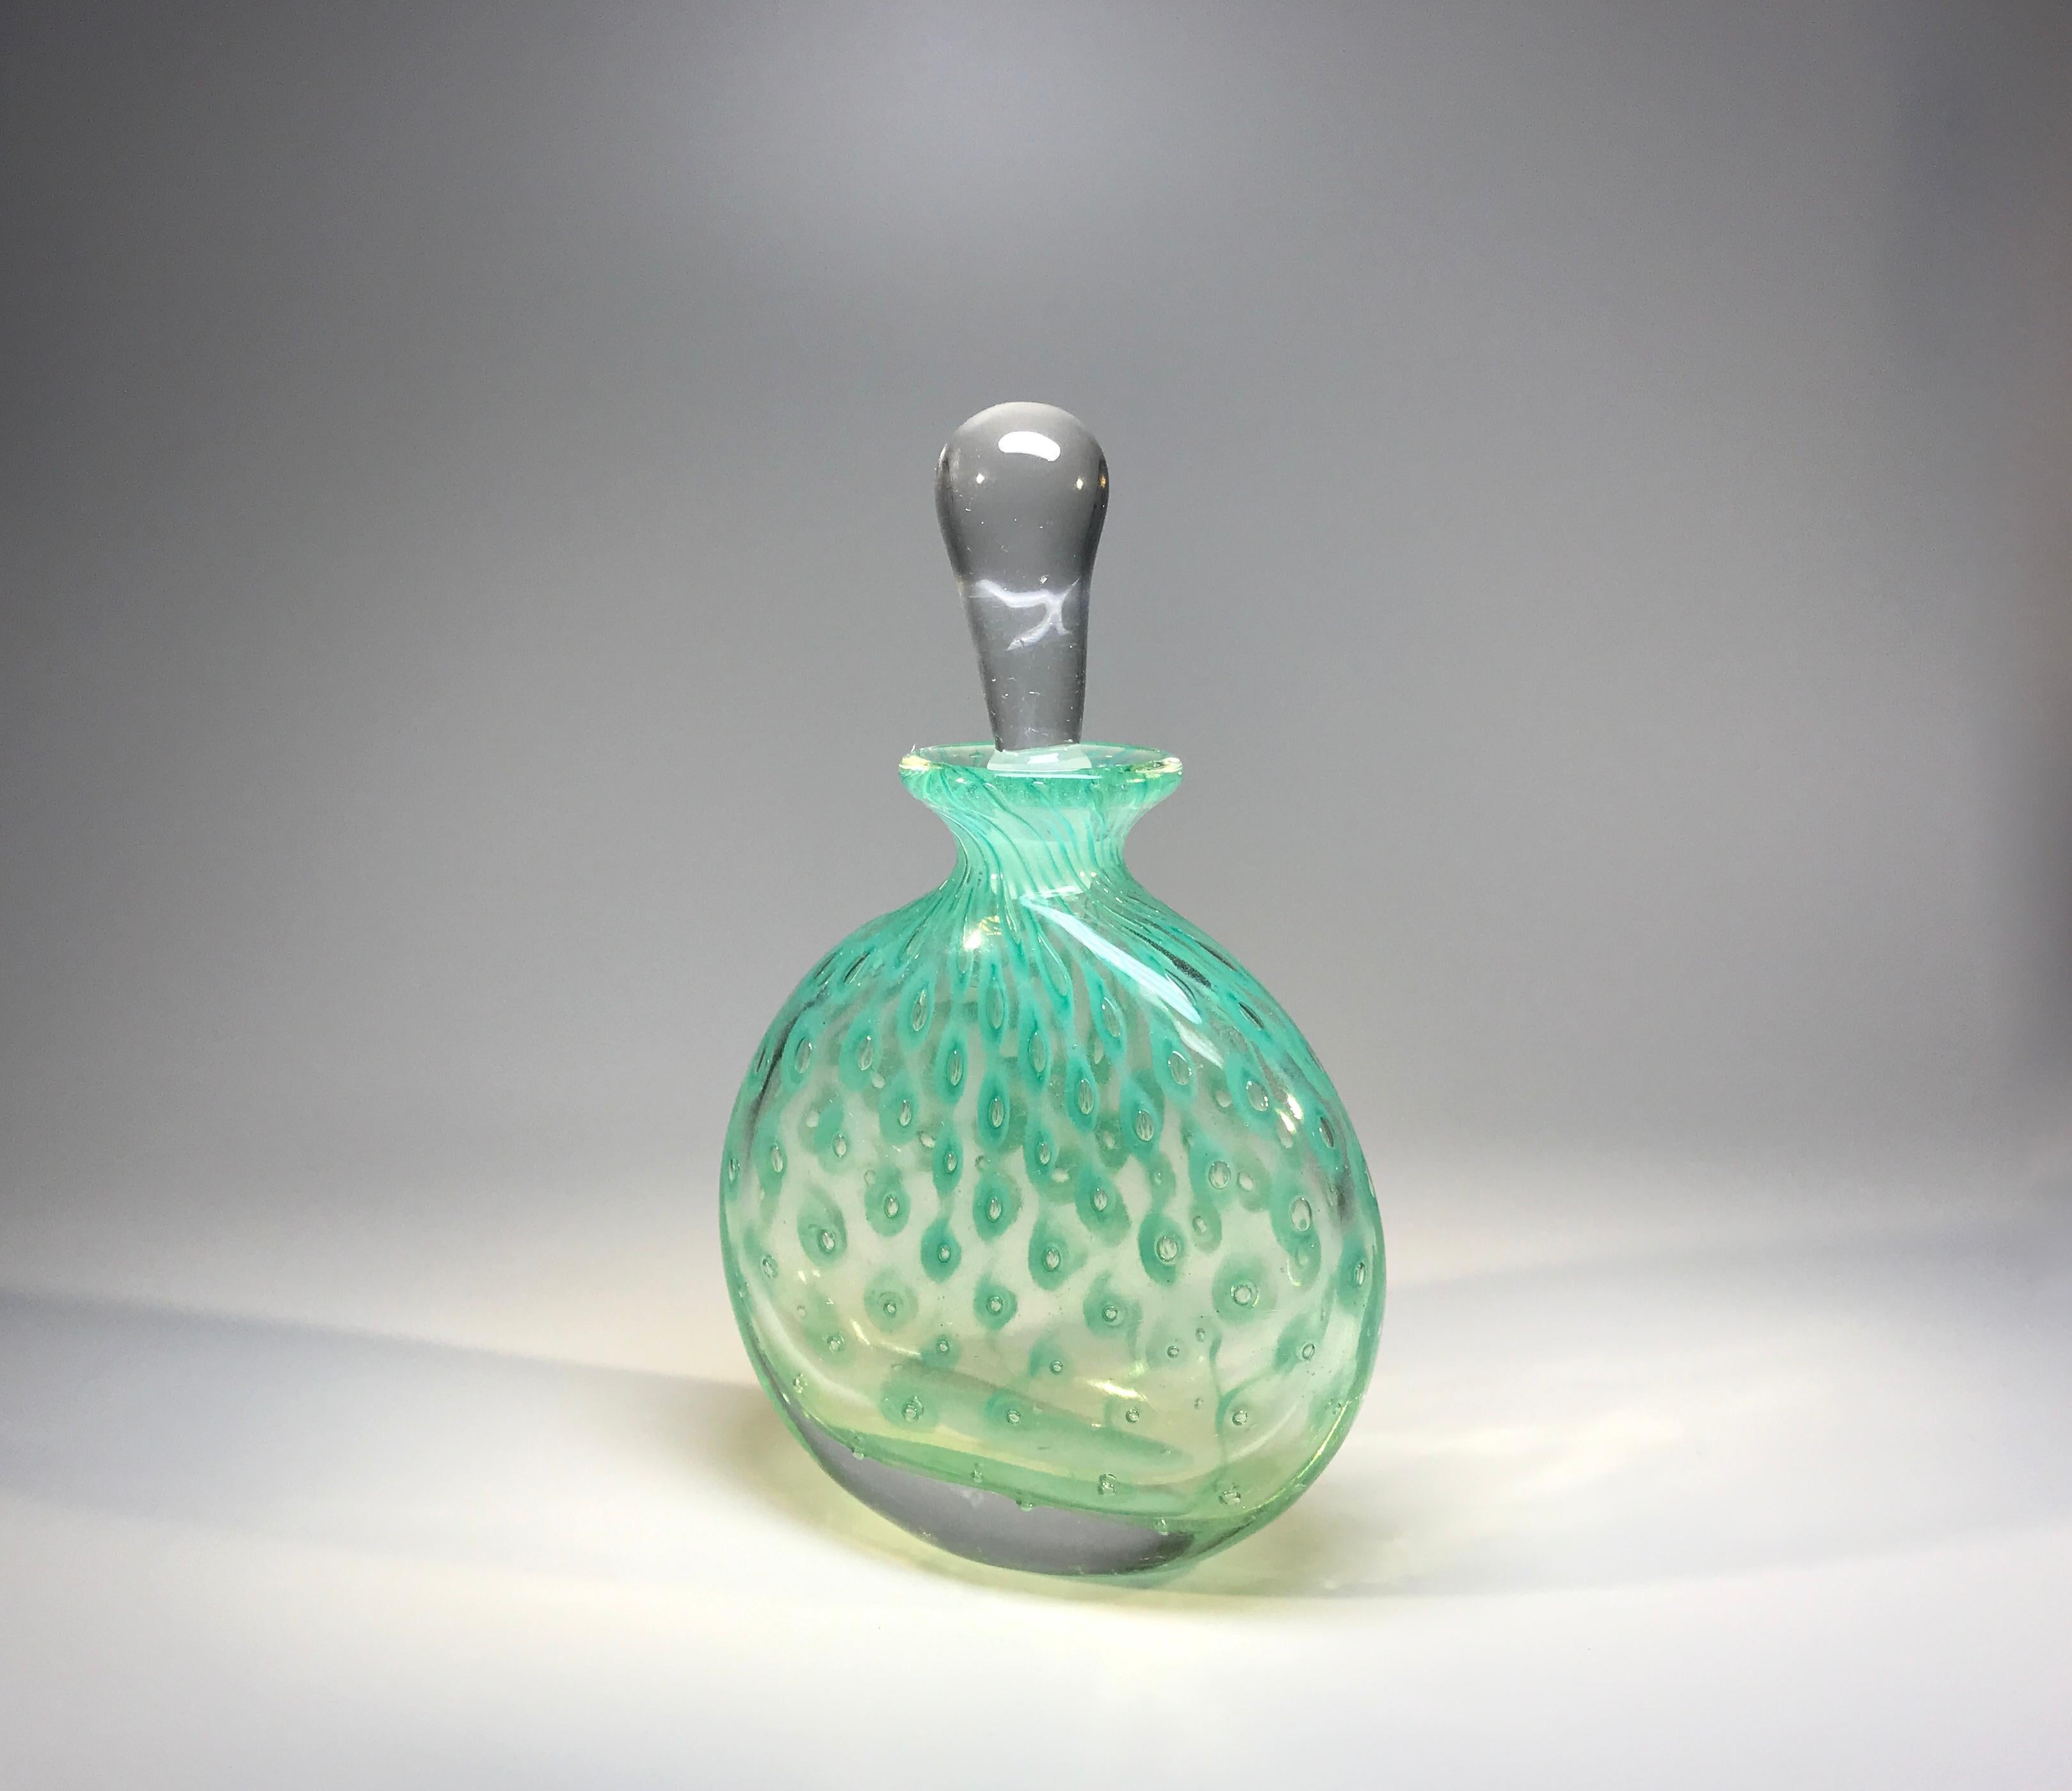 A beautiful vintage Murano, Italy, eau-de-nil controlled bubble, glass perfume bottle attributed to Alfredo Barbini
The piece is very elegant and the eau-de-nil color is superb
circa 1960s
Measures: Height 6 inch, width 5 inch, depth inch
In